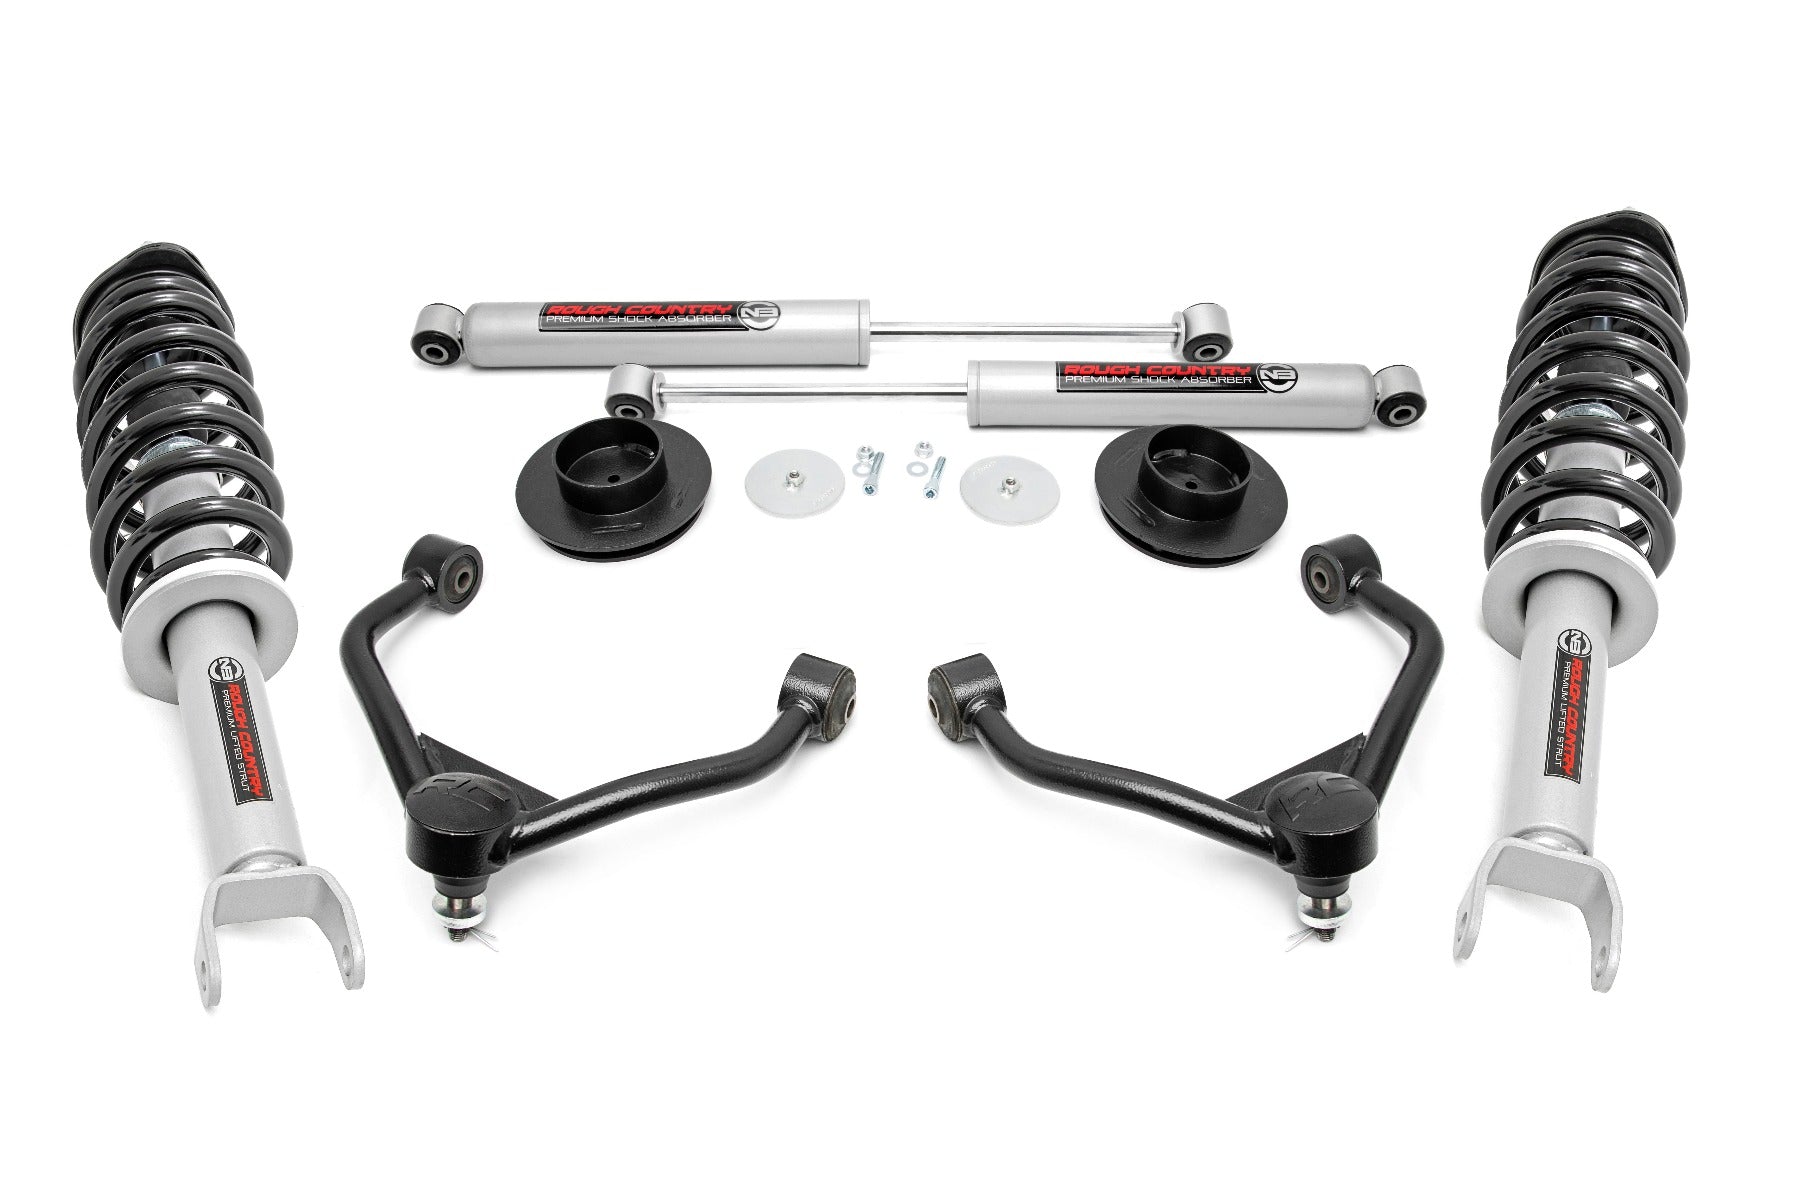 3.0 Inch Dodge Bolt-On Lift Kit w/ N3 Struts and Rear N3 Shocks For 12-18 Ram 1500 4WD Rough Country